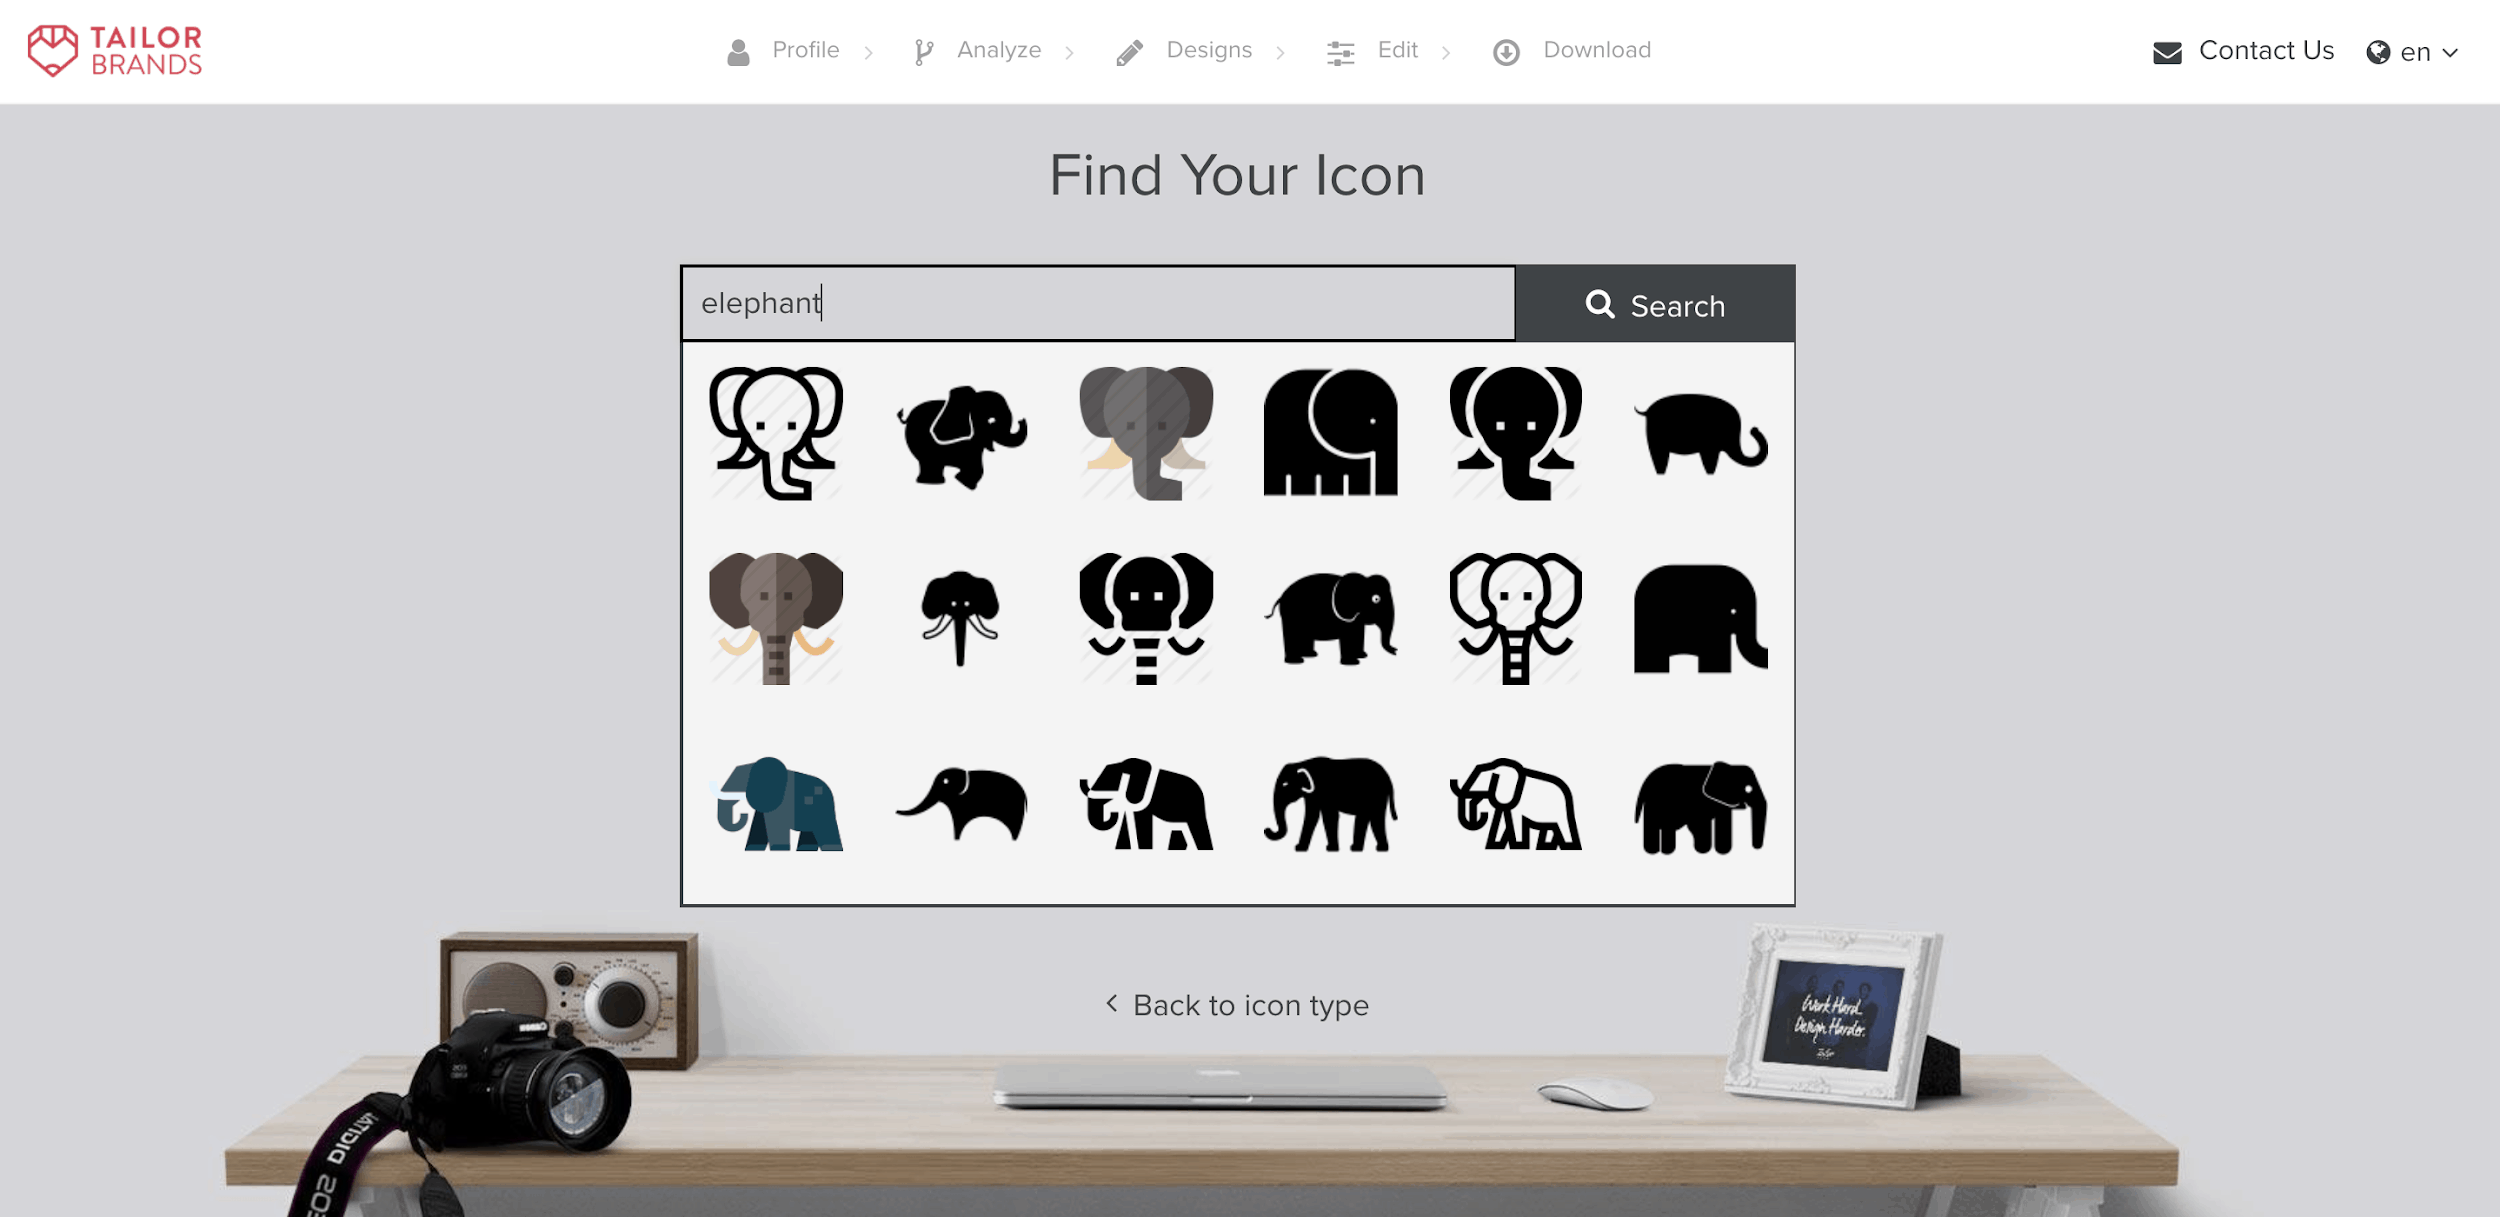 Tailor Brands screenshot - Find Your Icon